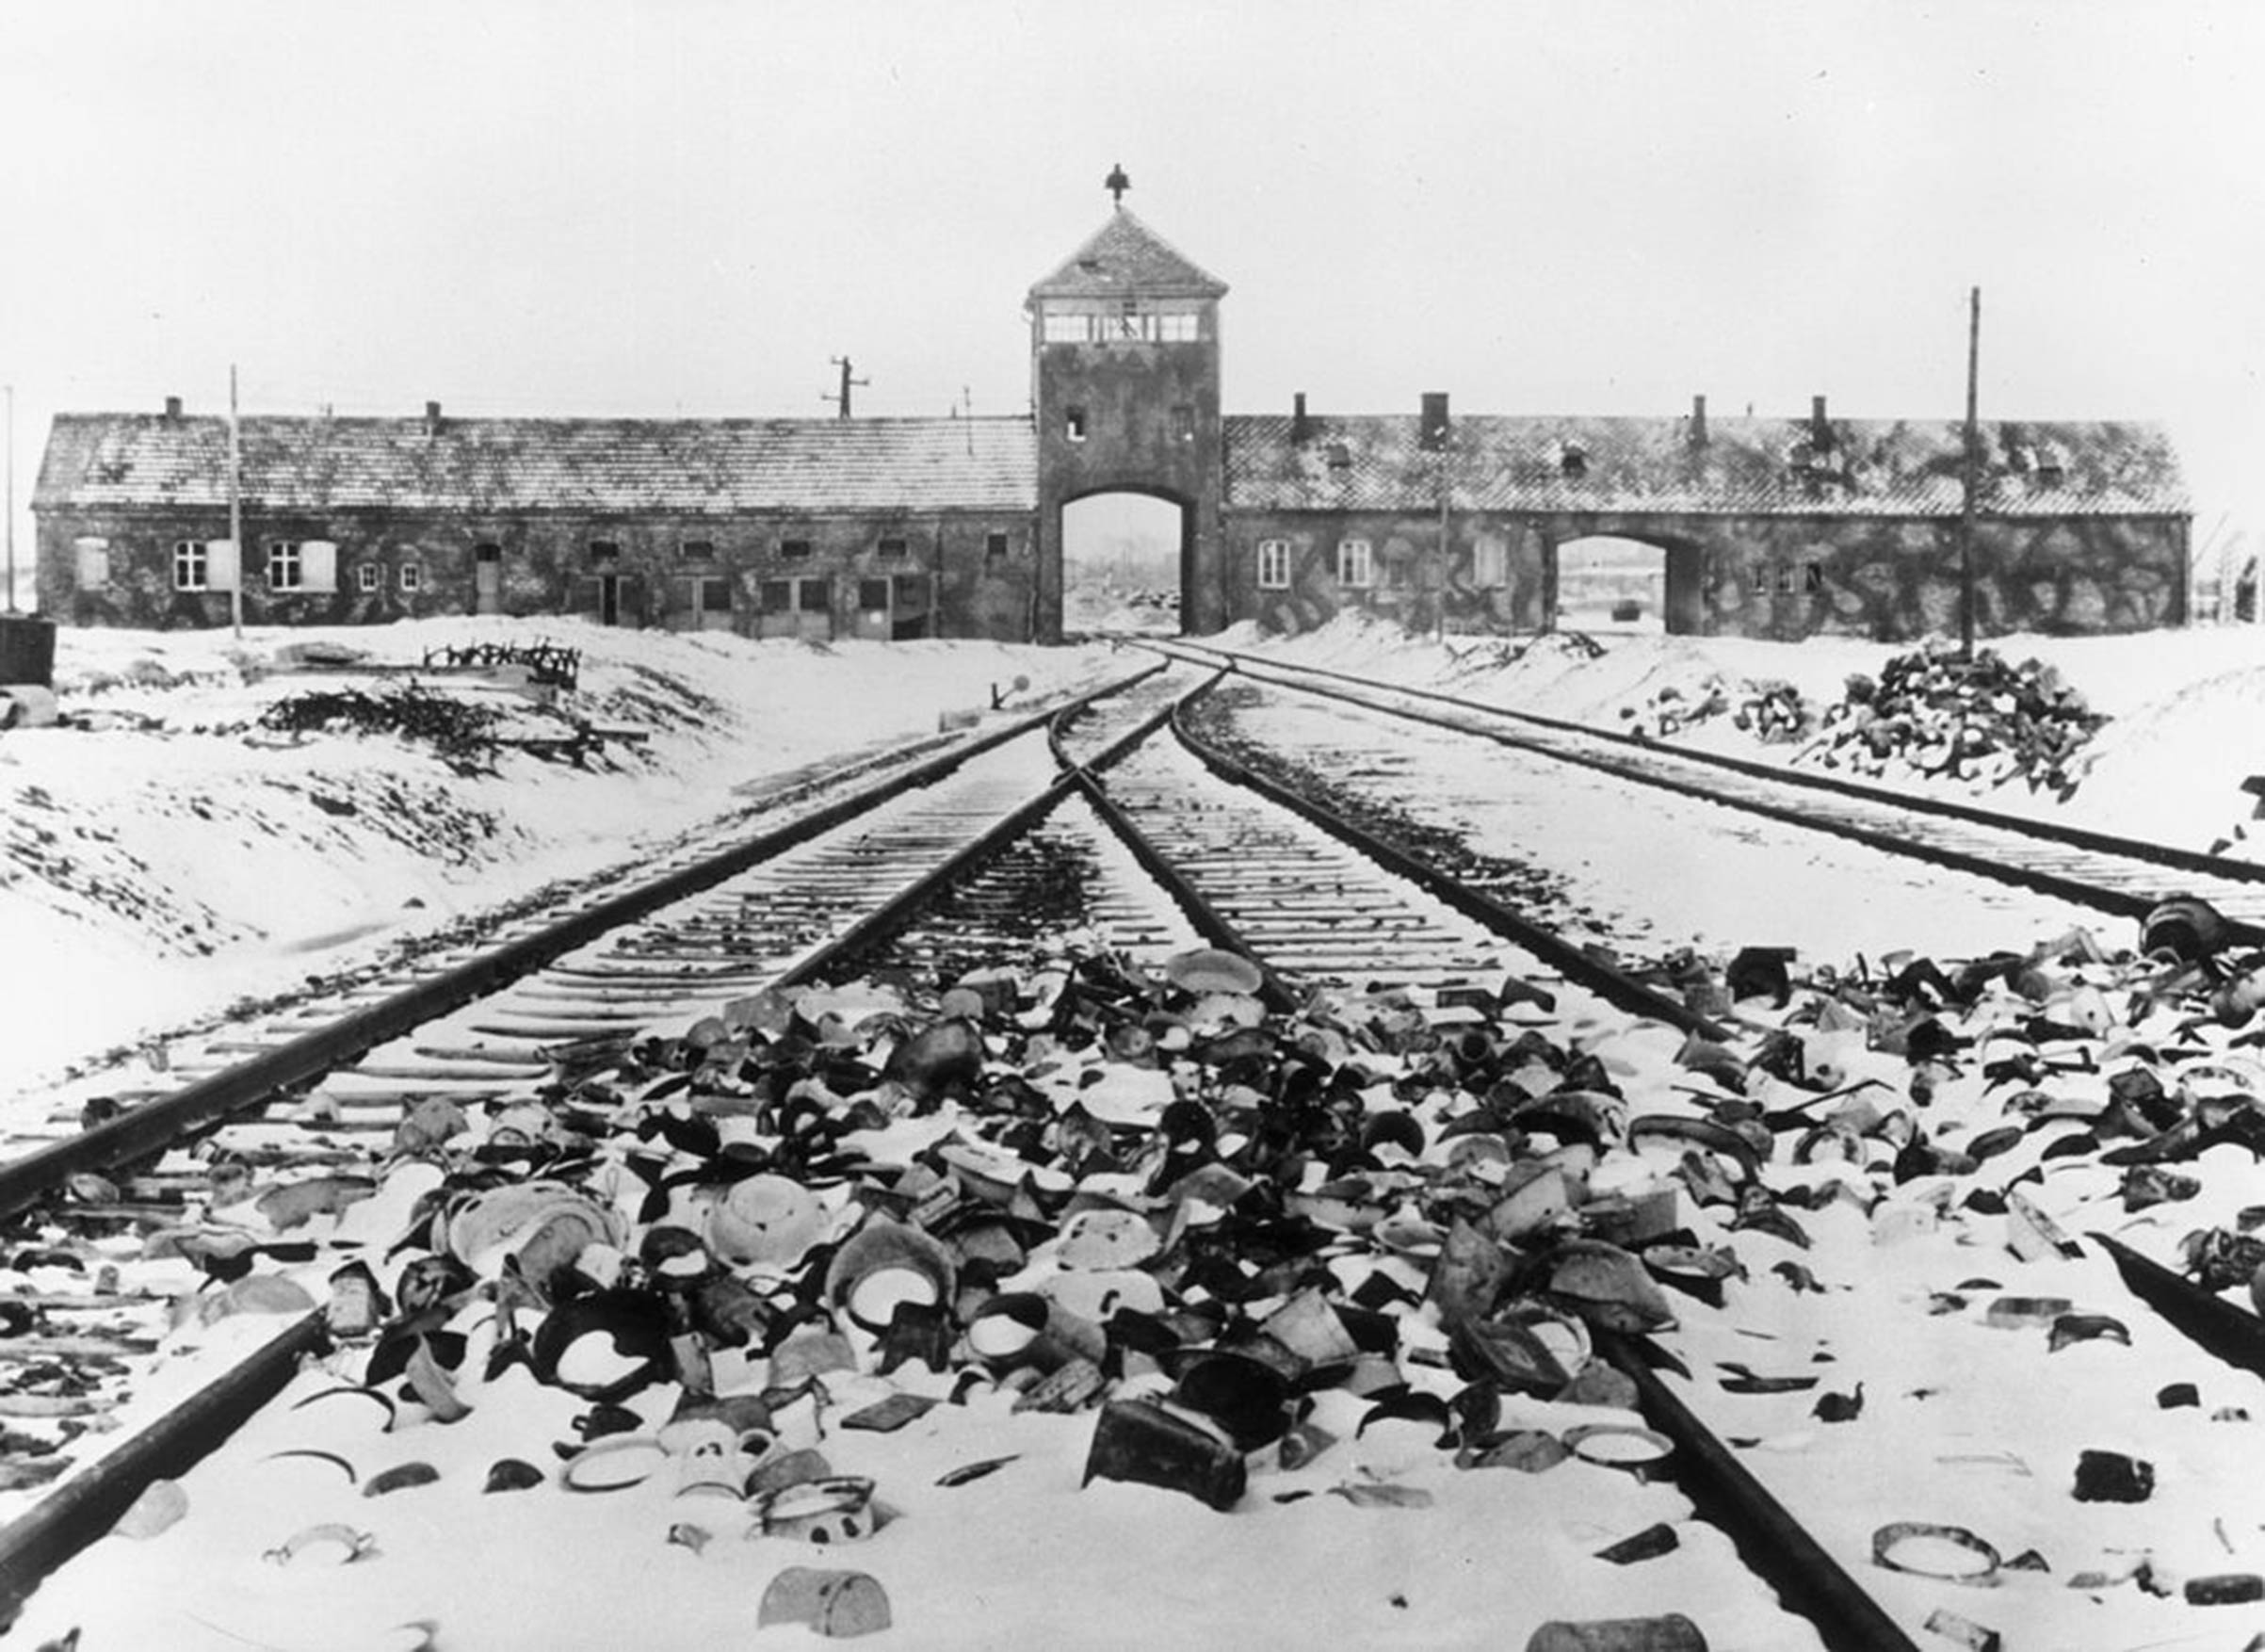 Snow-covered personal effects of those deported to the Auschwitz concentration camp in Poland litter the train tracks leading to the camp's entrance, circa 1945. (Hulton Archive—Getty Images)